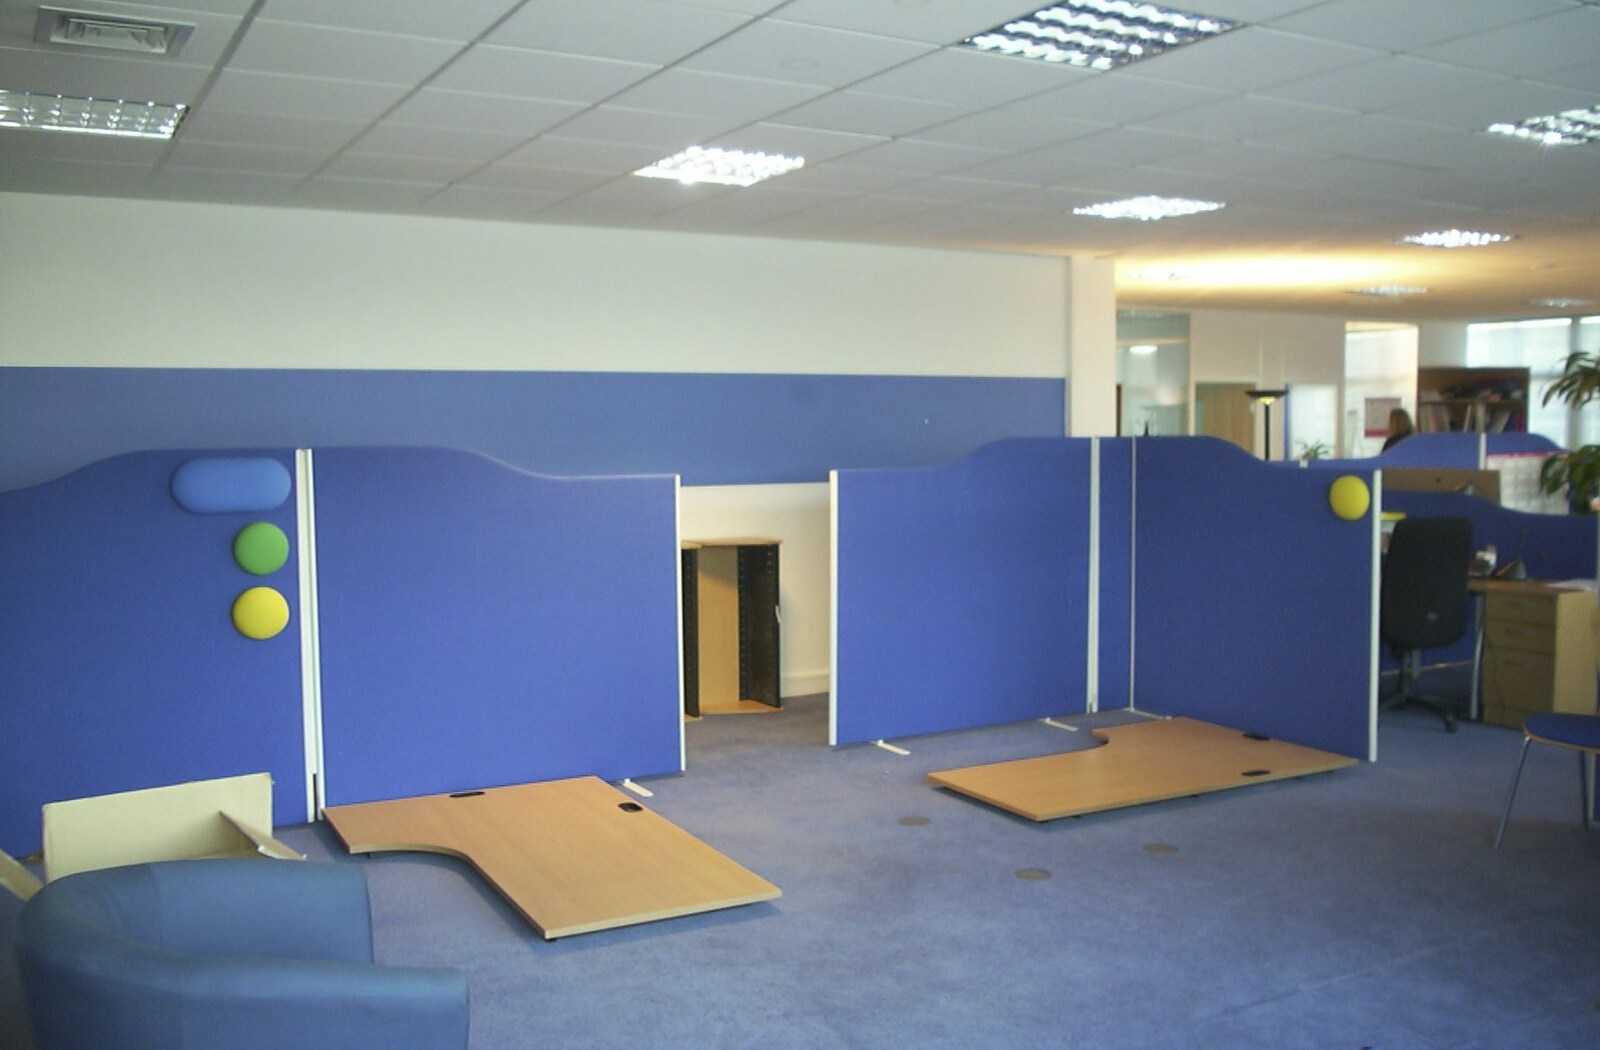 More new dividers for the Matrix House office from A 3G Lab/Trigenix Miscellany, Matrix House, Cambridge - 25th September 2004